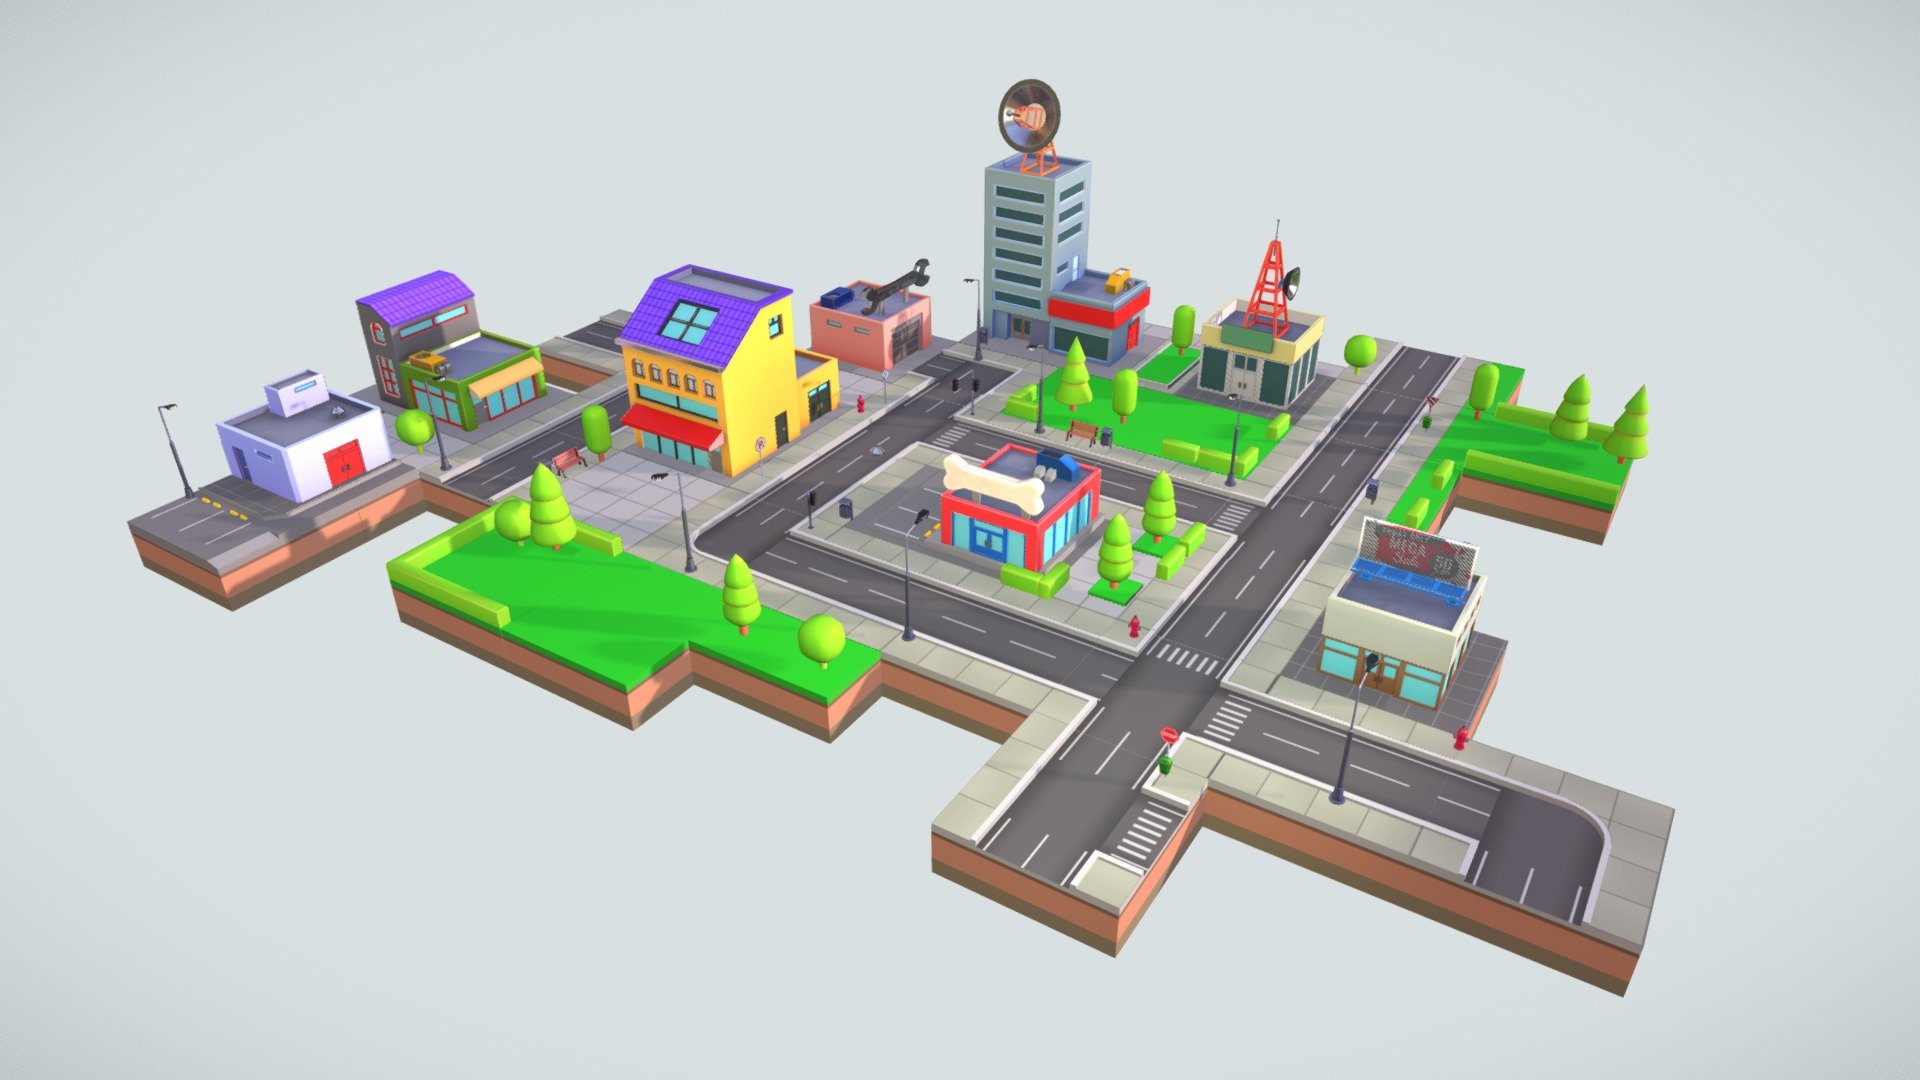 # CITY Pack:

Modular Props - Aspect ration 1:1




Streets and sidewalks

Buildings

Traffic lights and traffic signals

Low Poly
PBR Materials
UV Maps
Game Ready




Blender Files include -Evee

Texture 4k and 2K
 - City Toon 3D -Low Poly- Pack - Buy Royalty Free 3D model by SANTA (@sangost01) 3d model